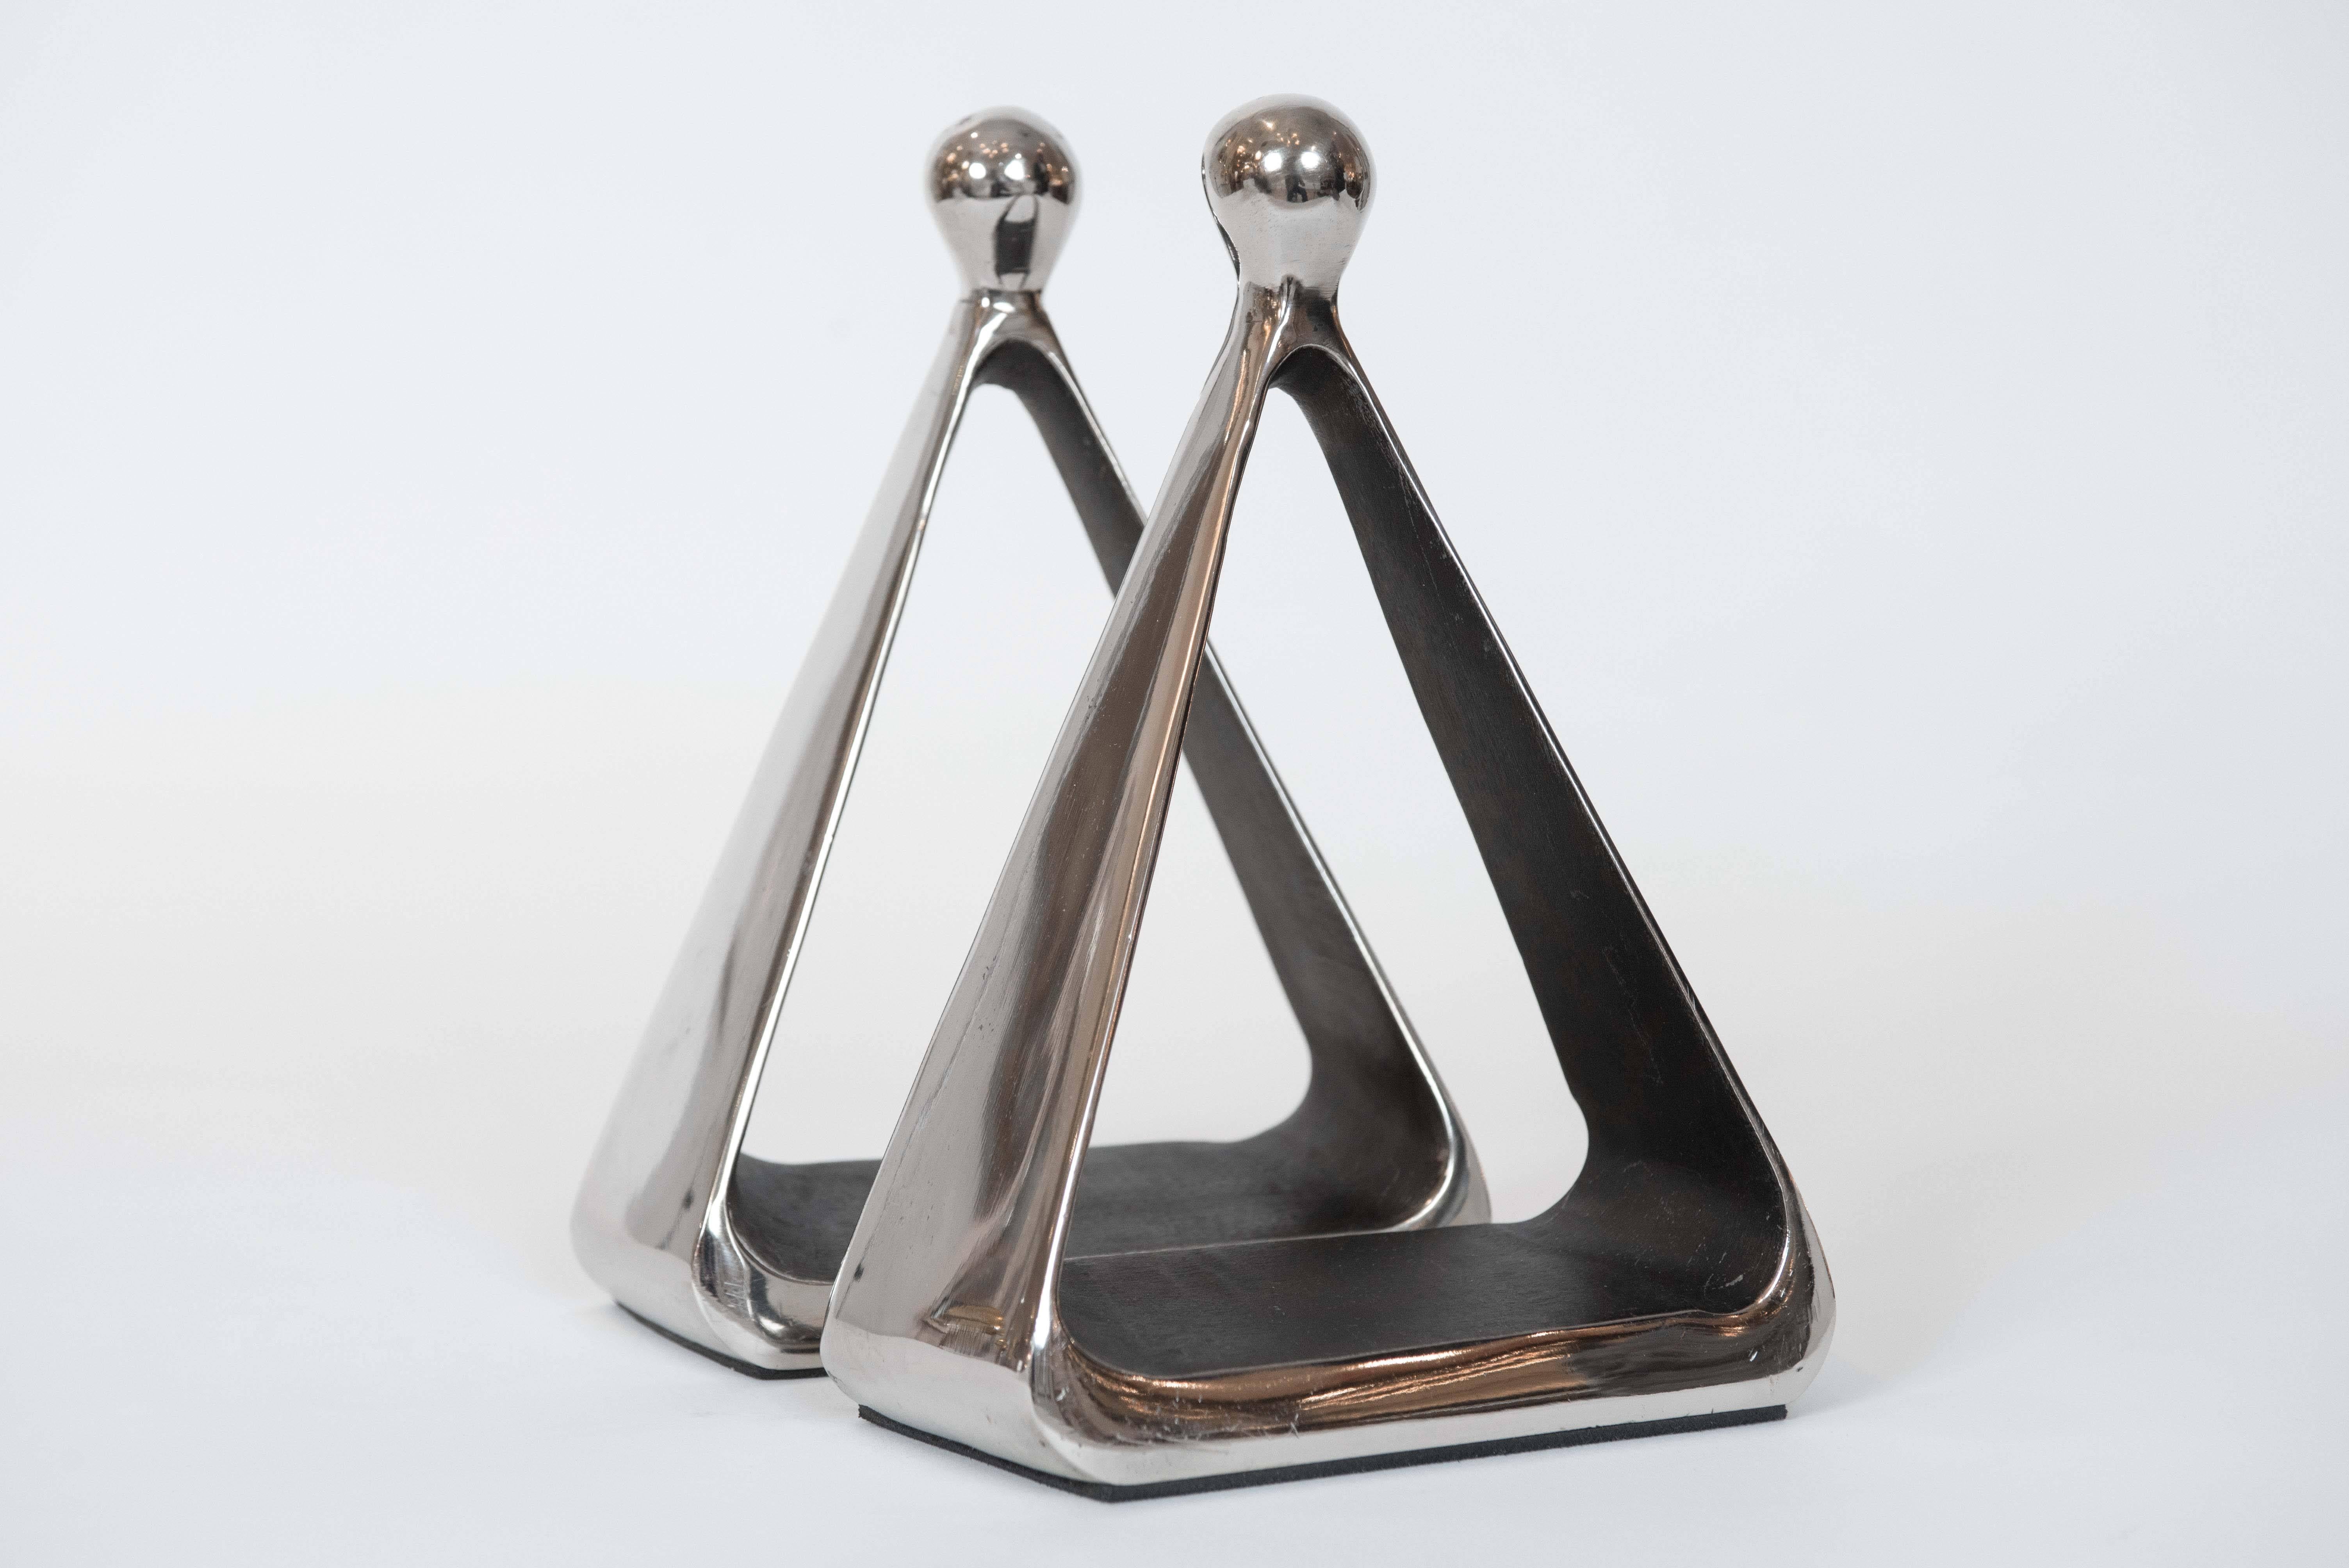 A sculptural stirrup style pair of bookends with chrome metal exterior finish and
a bronze colored interior.